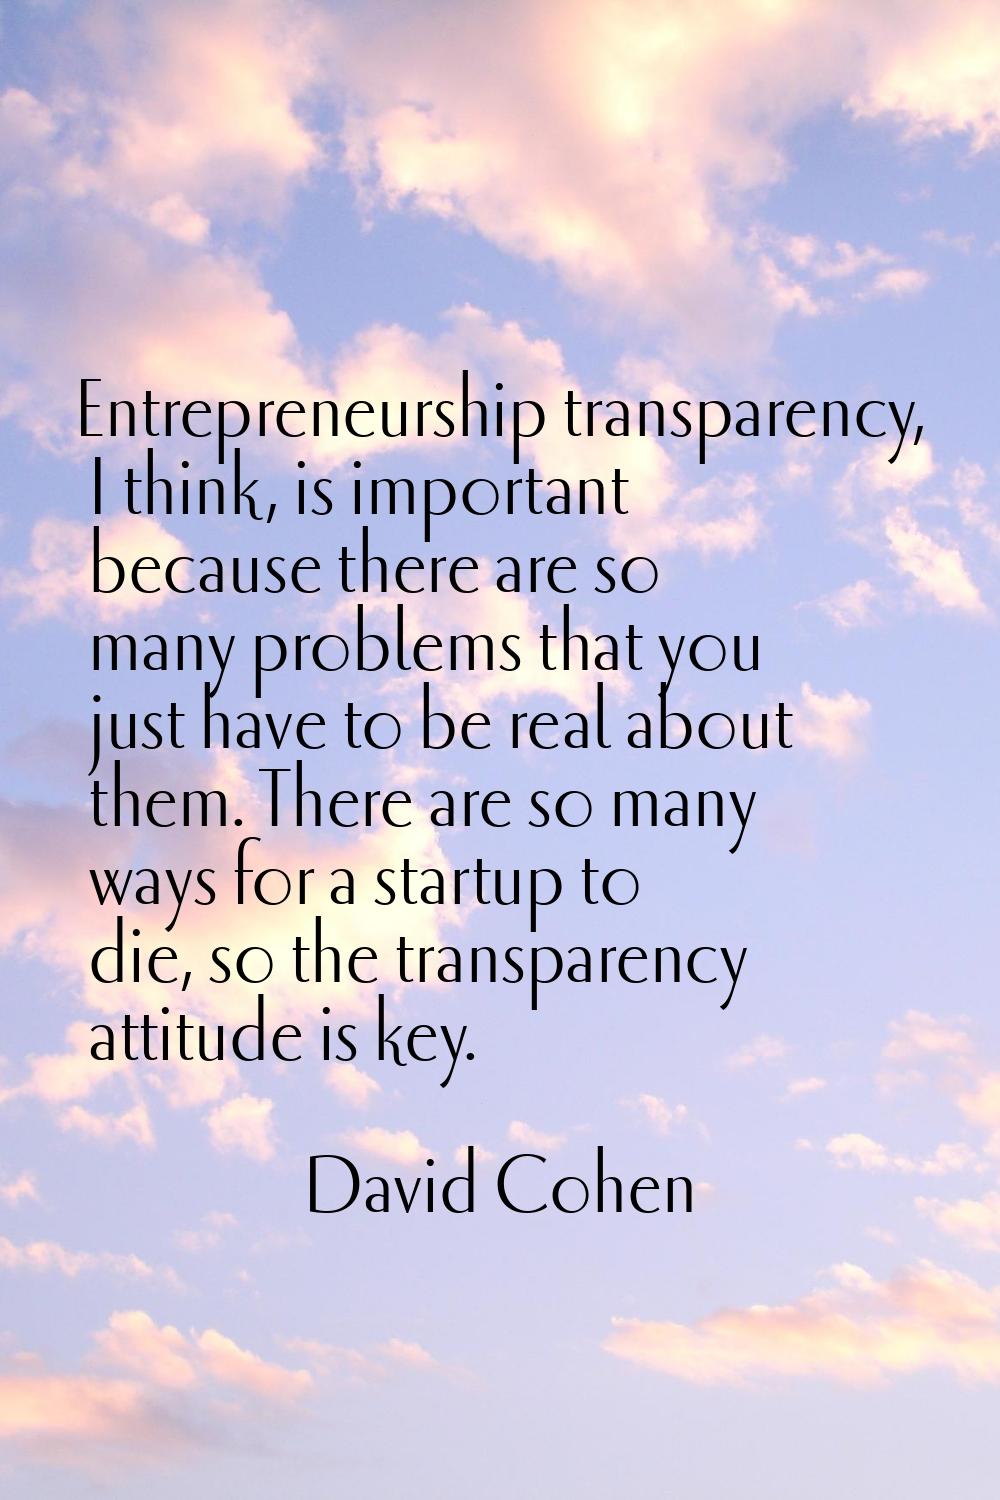 Entrepreneurship transparency, I think, is important because there are so many problems that you ju